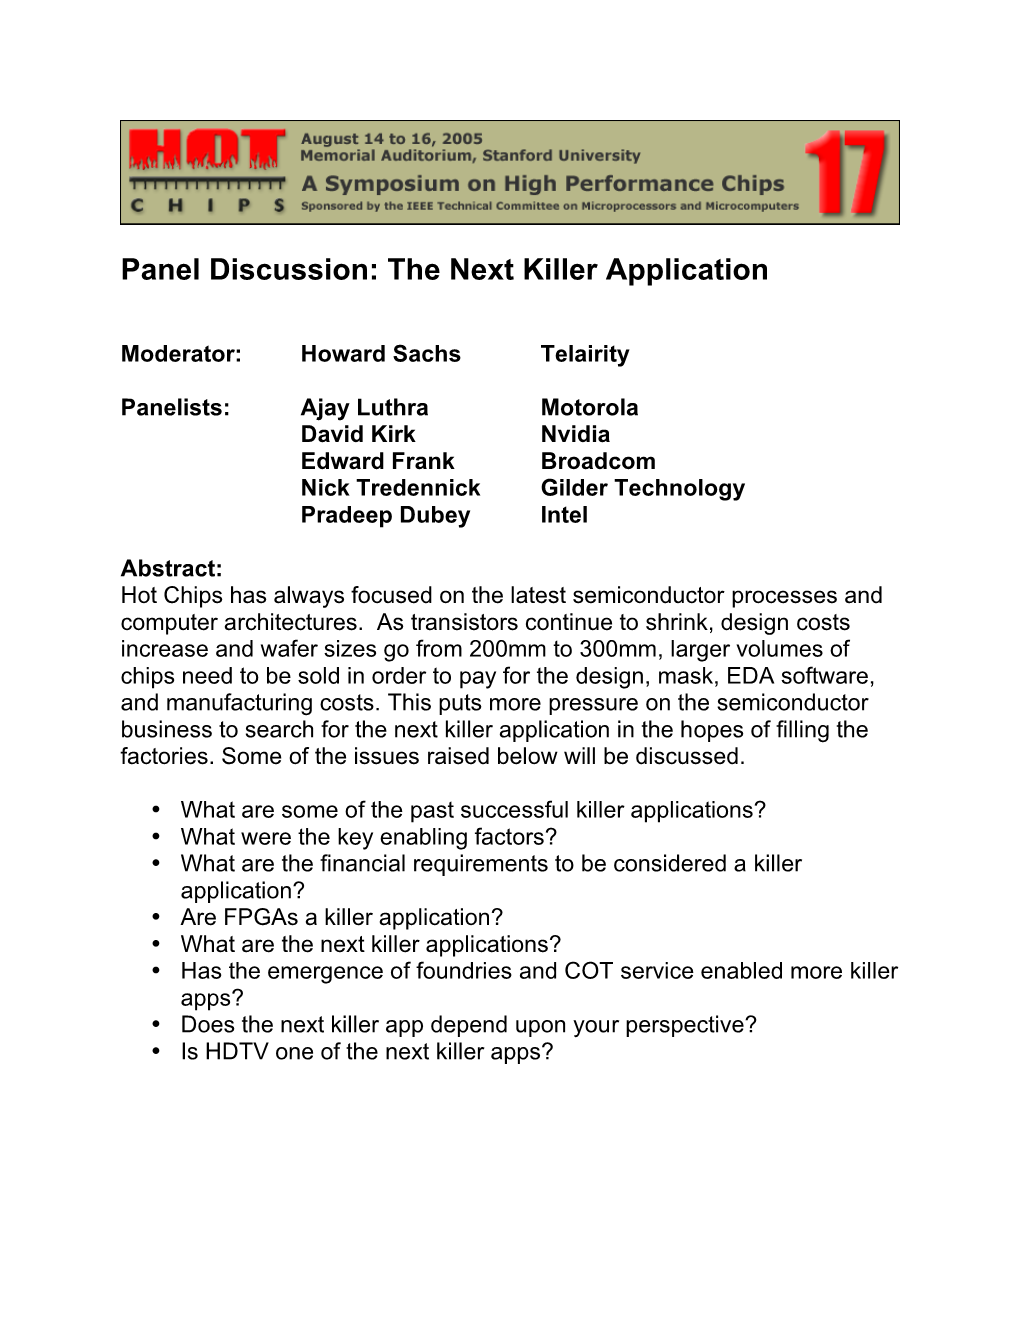 Panel Discussion: the Next Killer Application